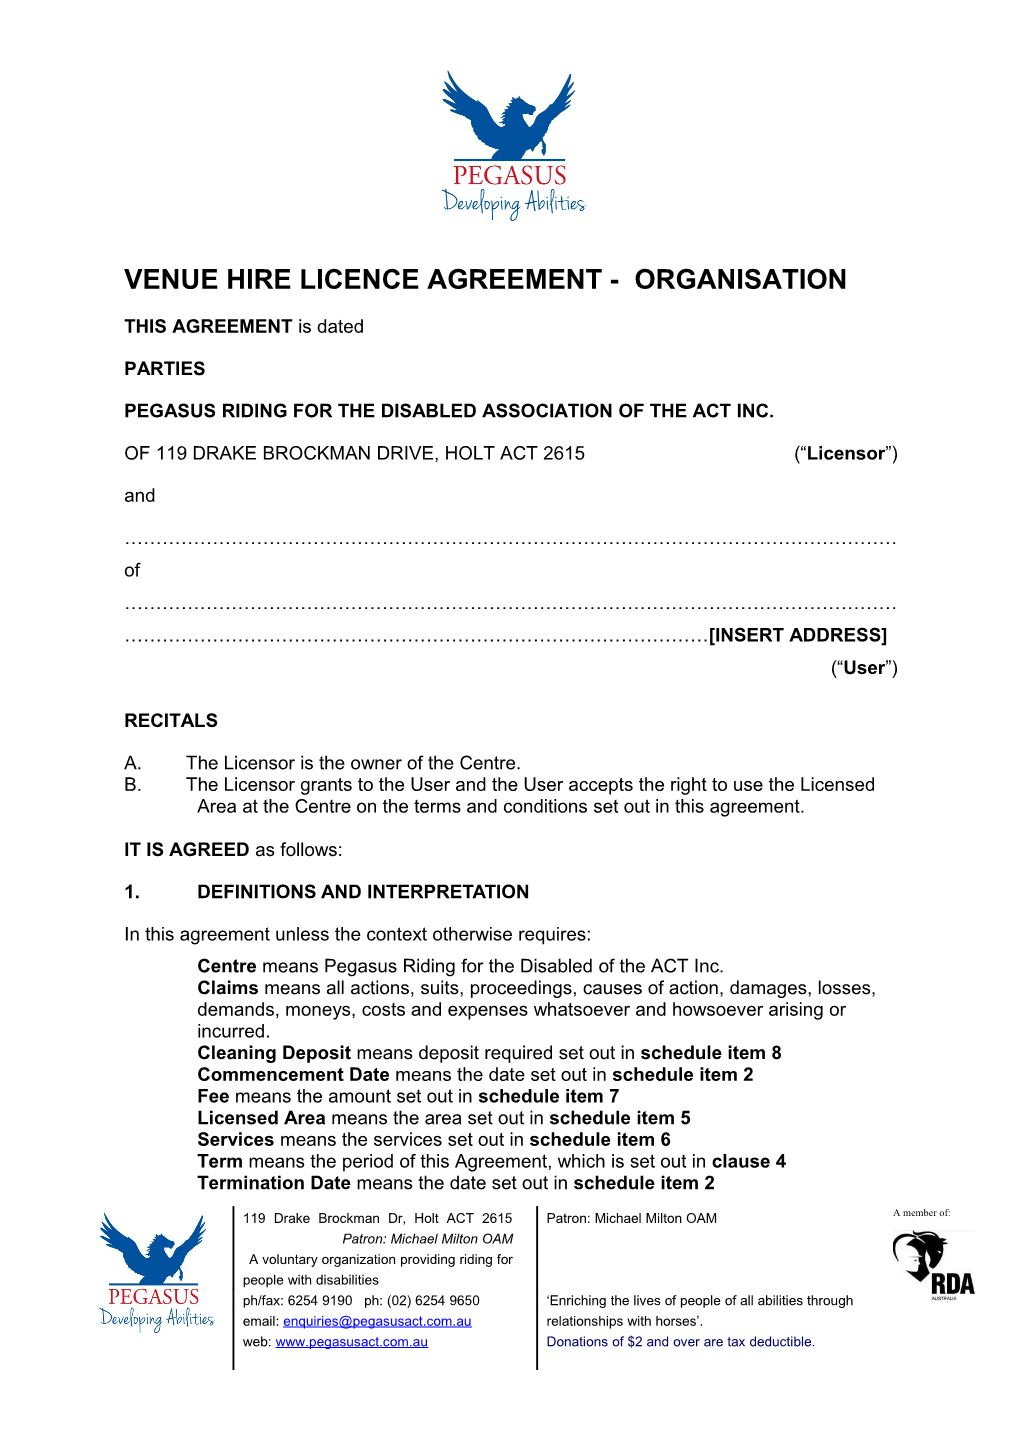 Venue Hire Licence Agreement - Organisation